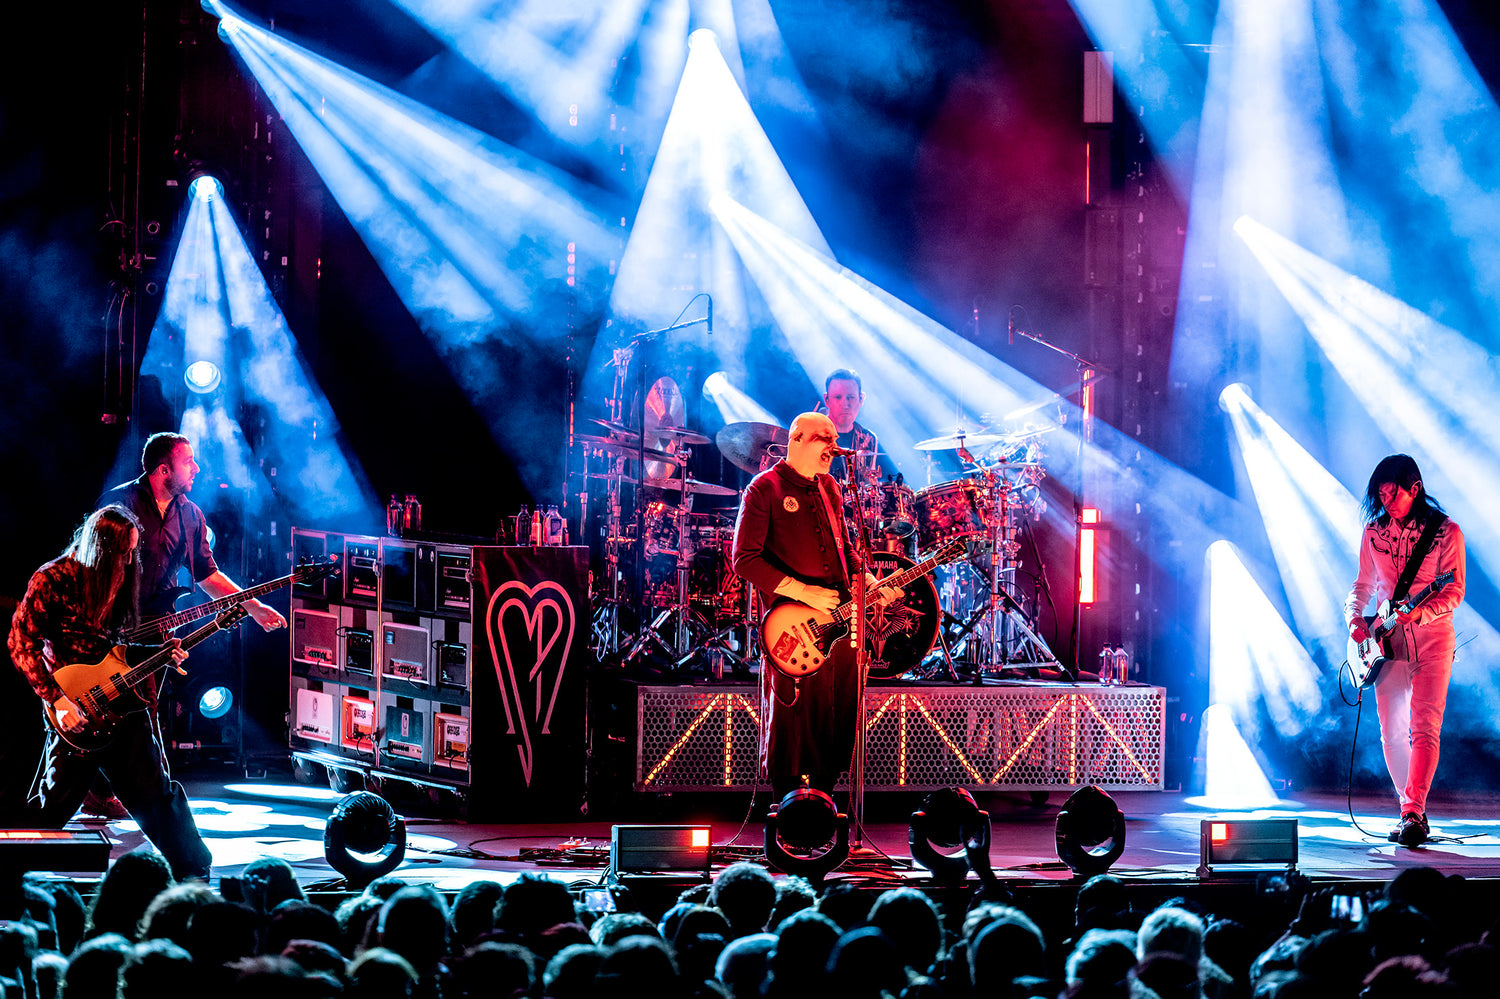 THE SMASHING PUMPKINS PROVE BUILT TO LAST ON ‘THE WORLD IS A VAMPIRE’ TOUR